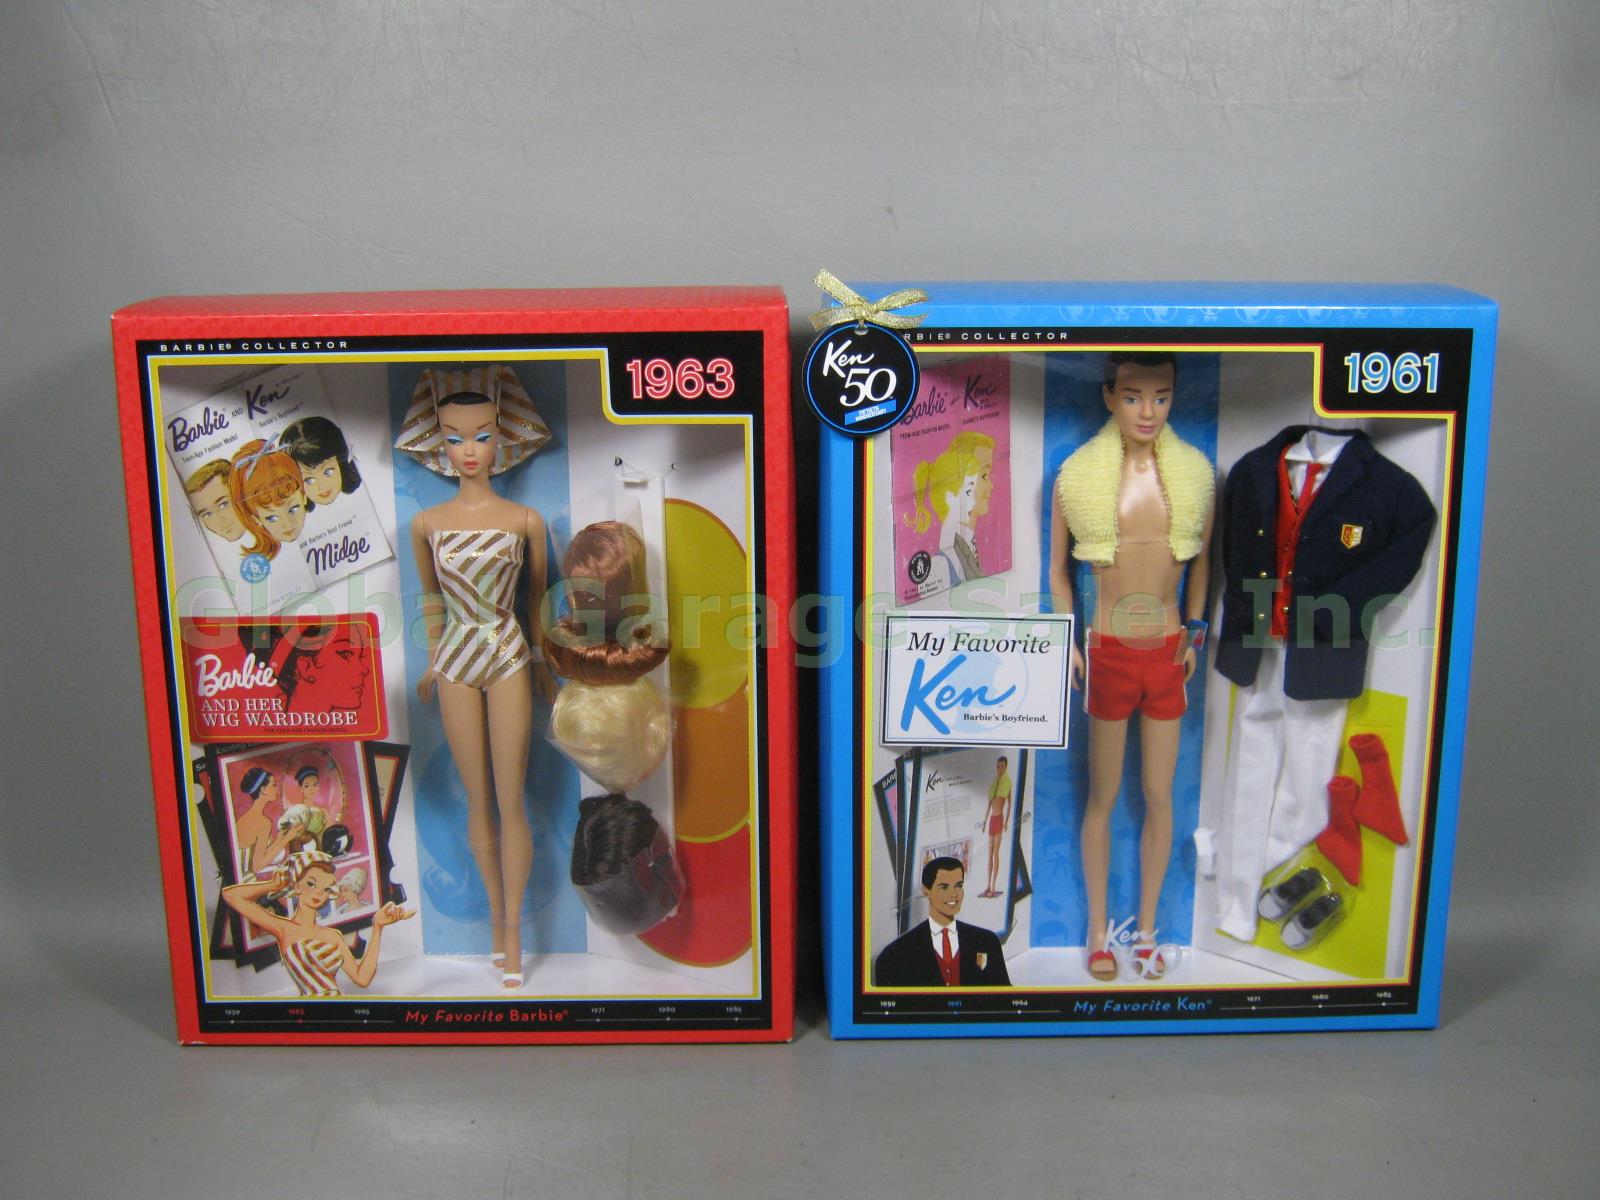 New 2009 My Favorite Barbie 1963 Reproduction Collector Doll + 2010 Ken 1961 NR!